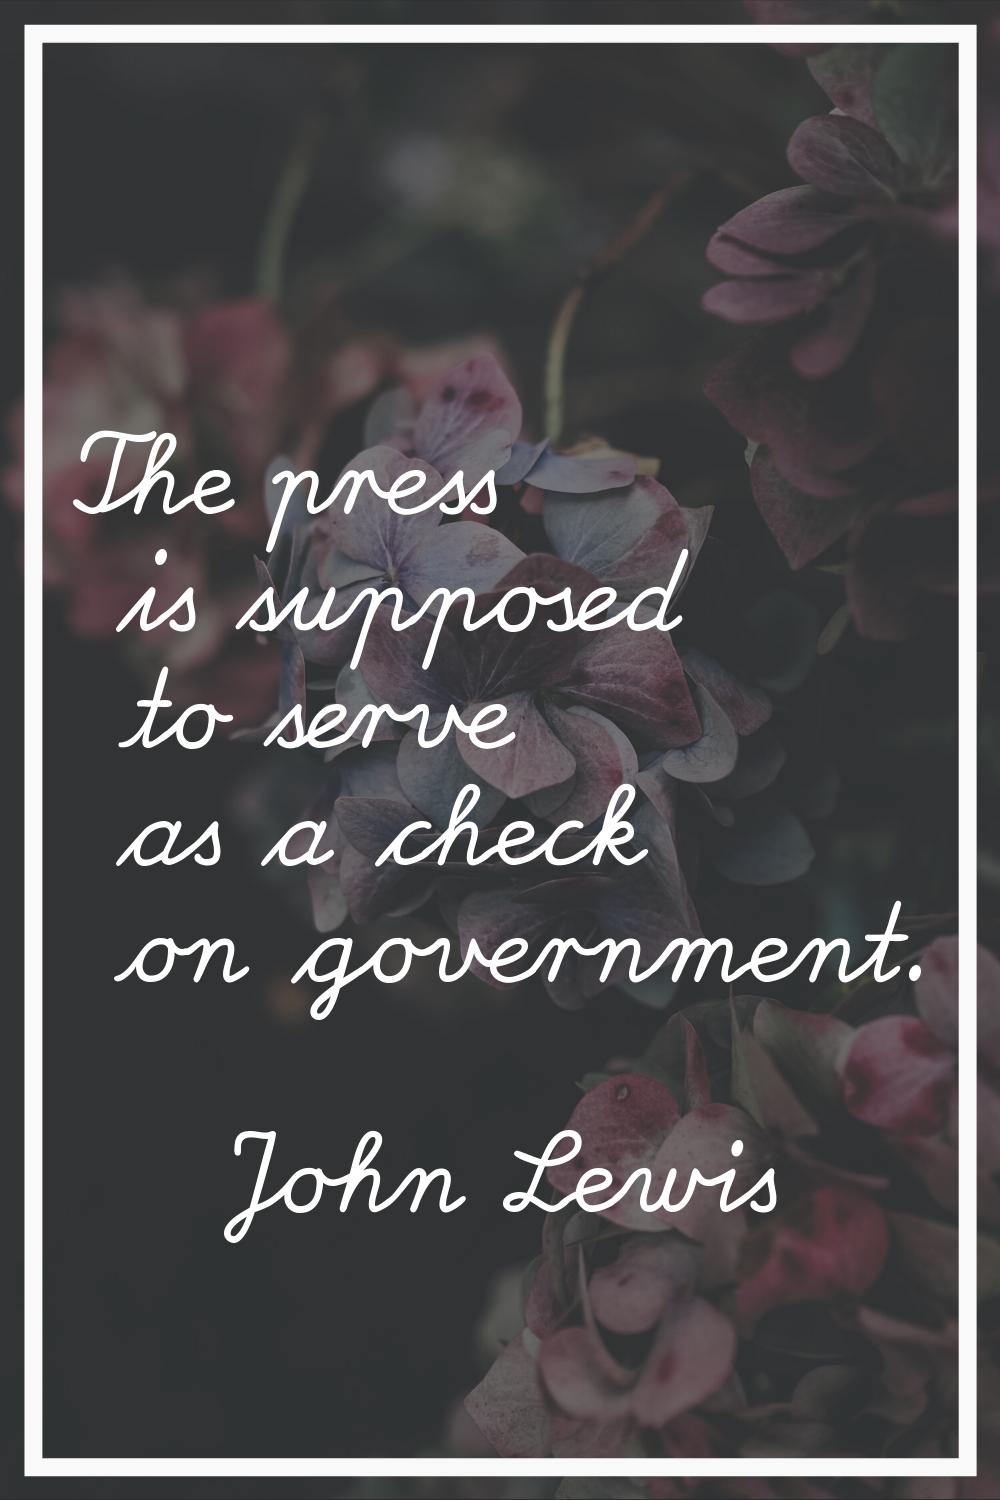 The press is supposed to serve as a check on government.